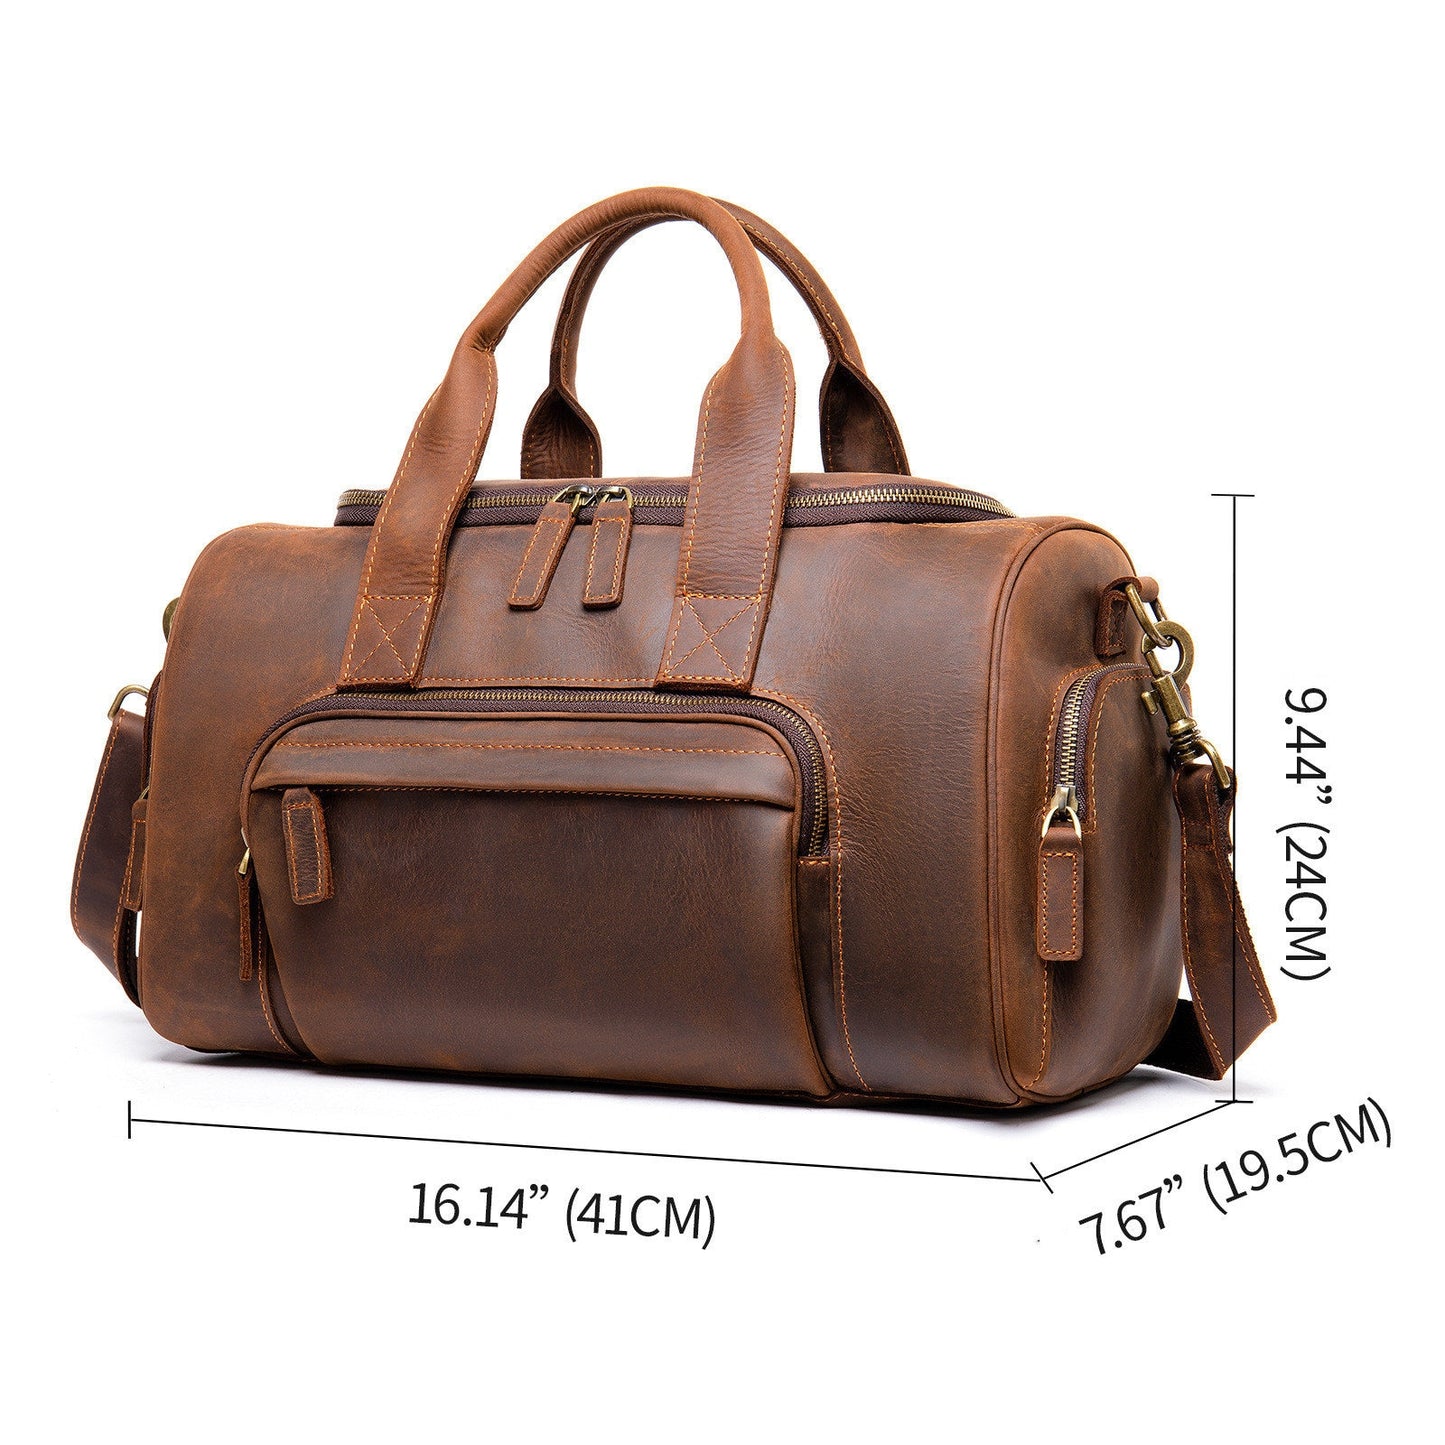 New Leather Handmade Retro Leather Men's Hand Luggage Bag Large Capacity Leather bag, leather tote bag, leather carryon bag, shoulder bag,